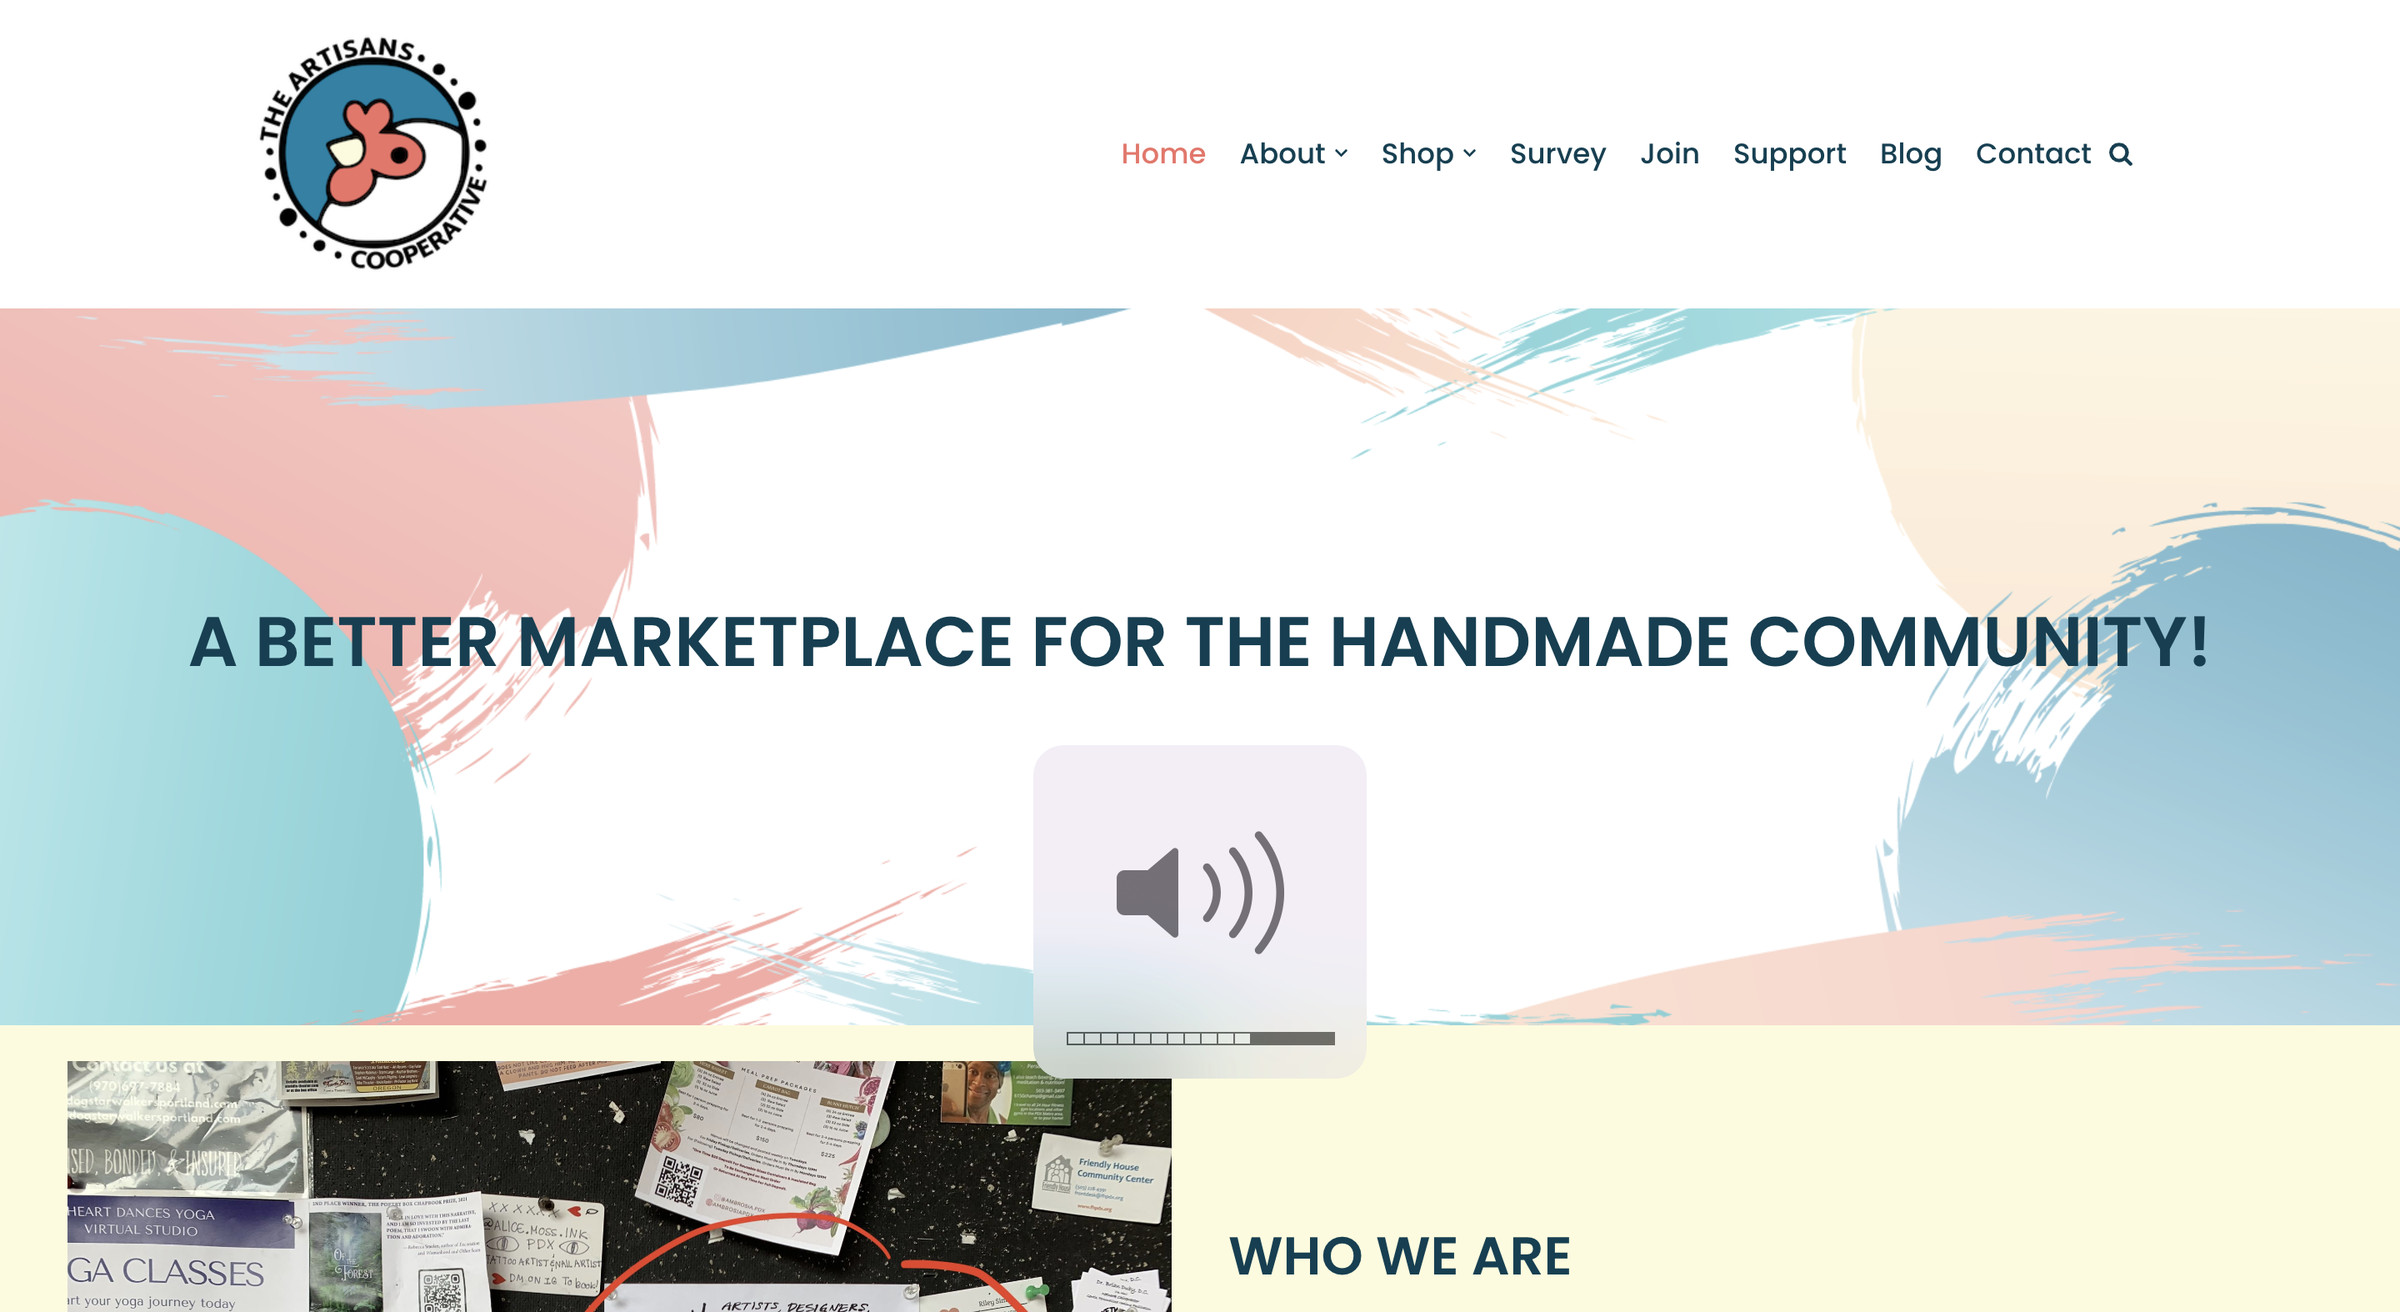 Artisans Cooperative main webpage, with a logo in top left, a menu top right, and abstract design in the center with the words “A better marketplace for the handmade community!”